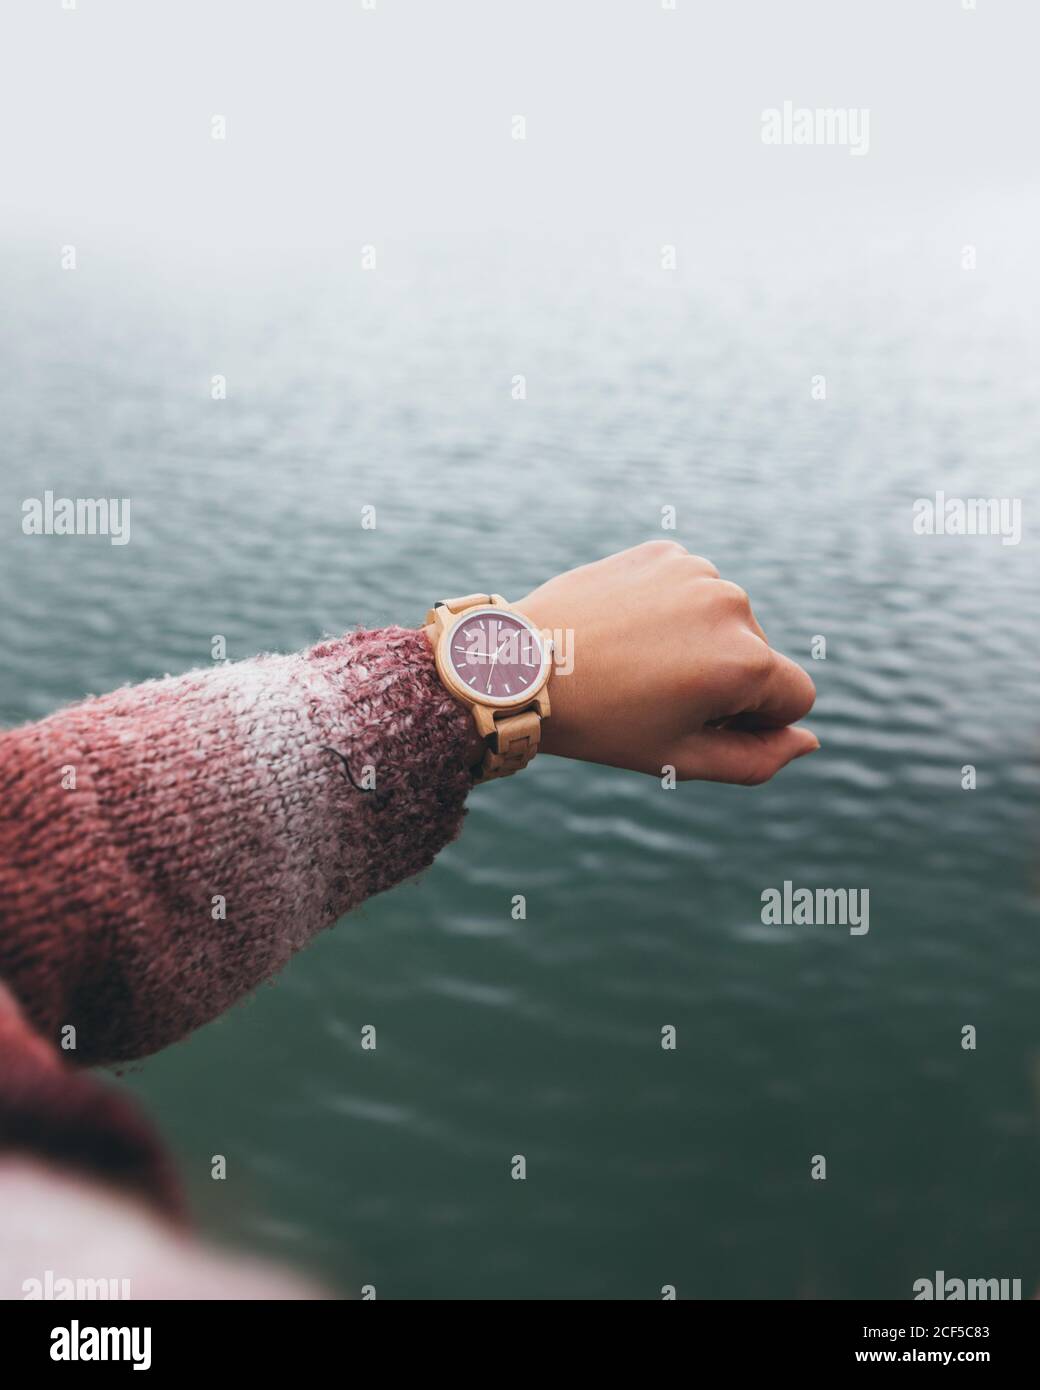 From above crop anonymous female in warm sweater checking time on stylish wristwatch while holding hand over river in cloudy day Stock Photo